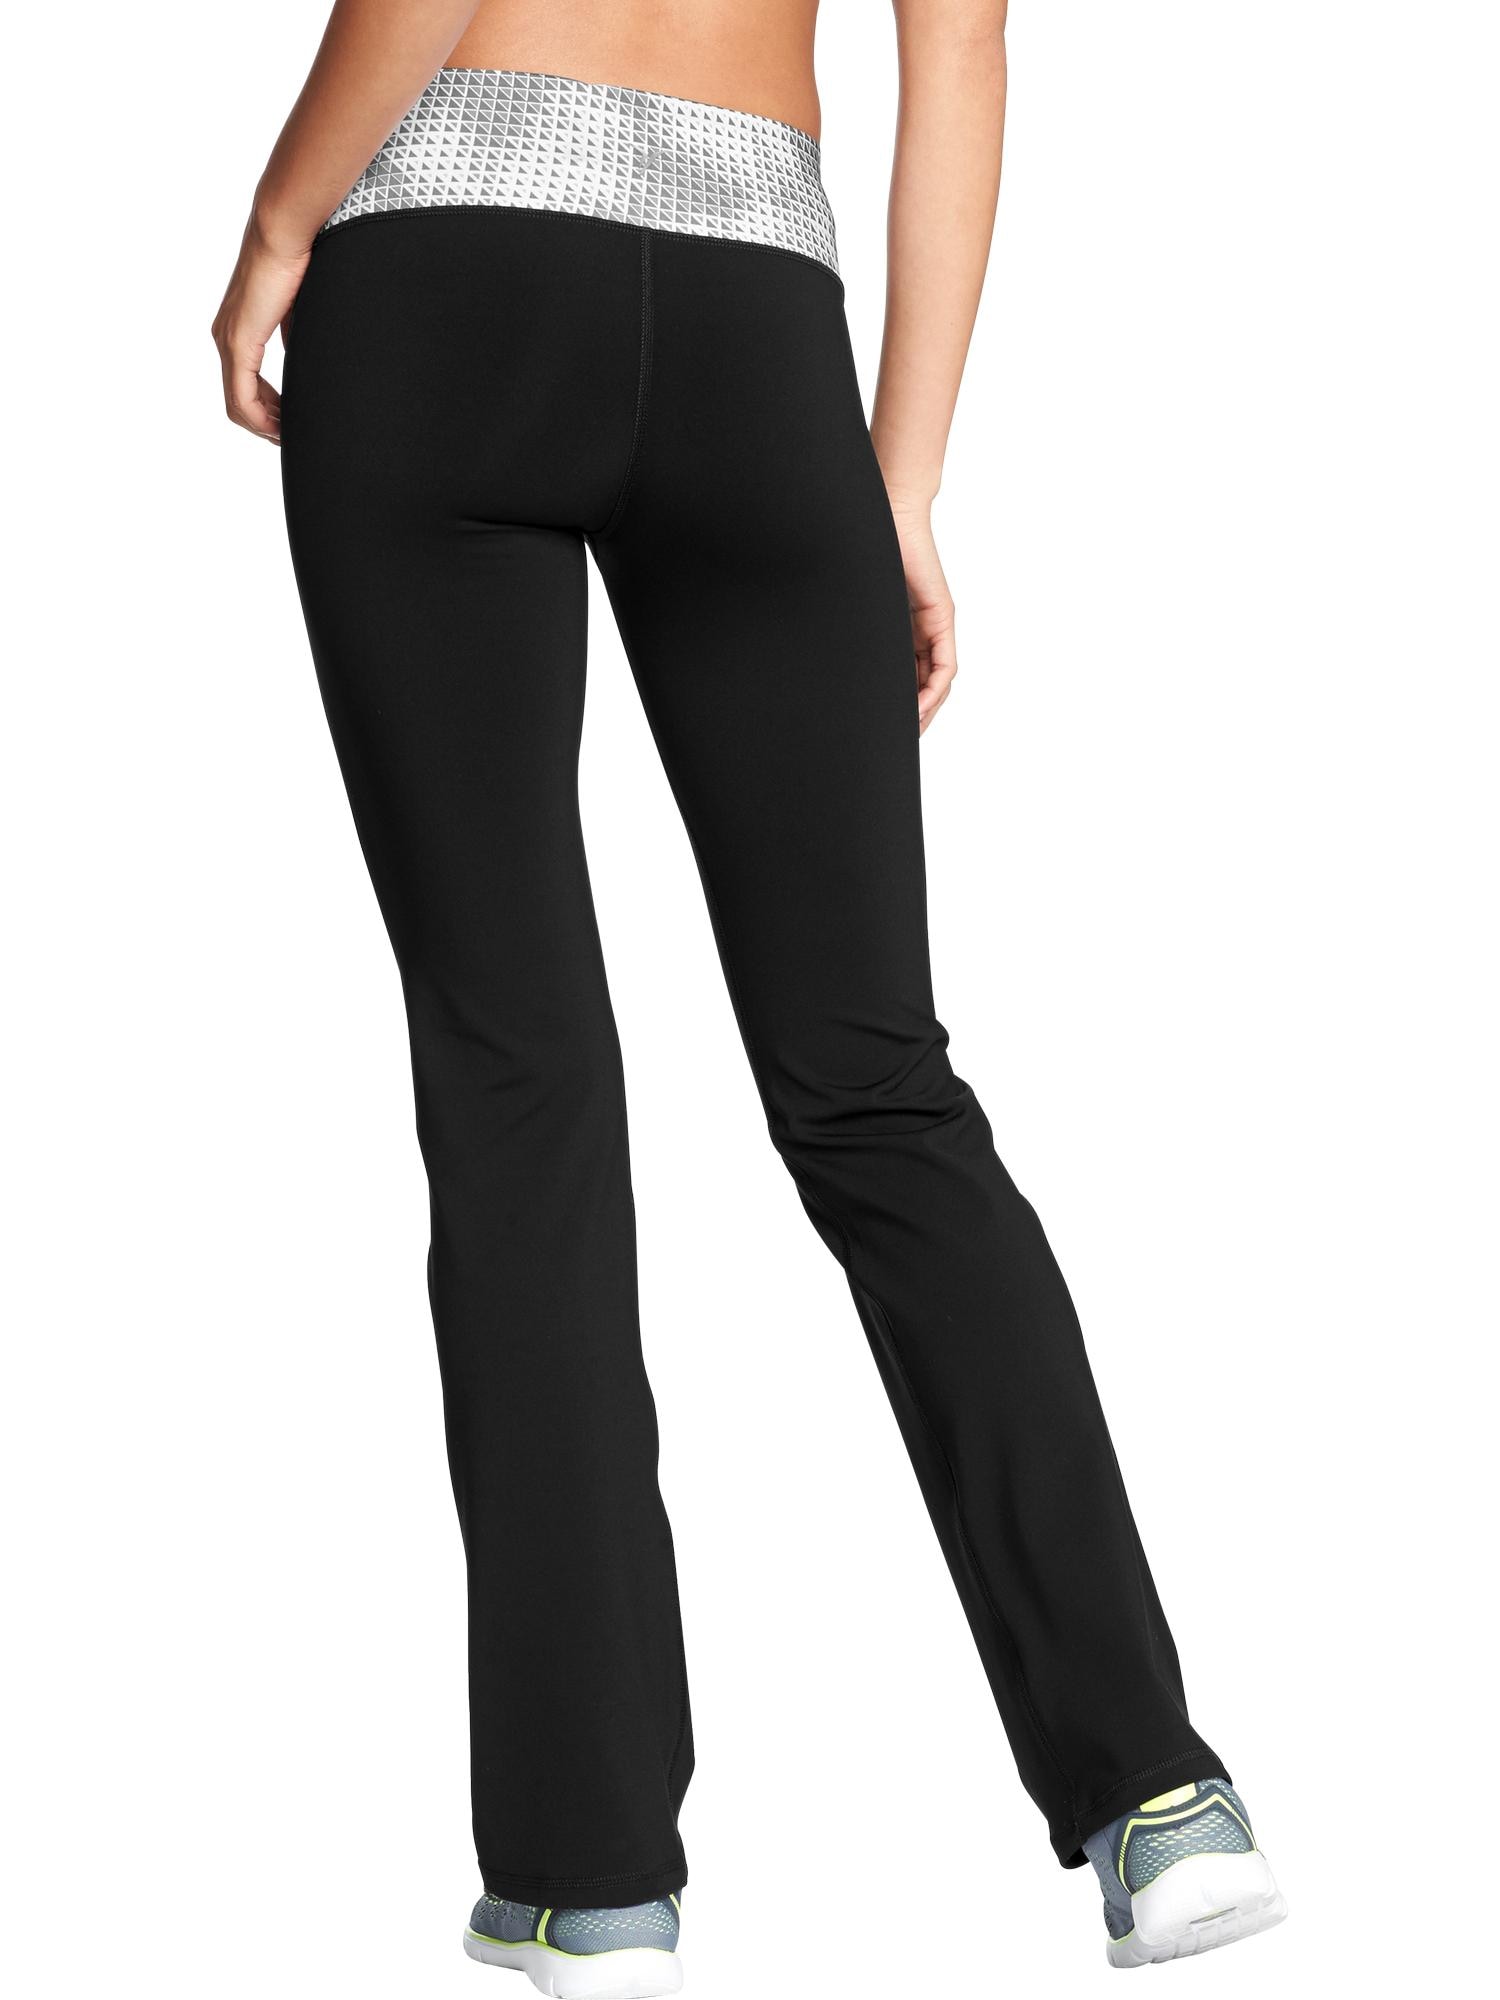 High-Rise Boot-Cut Compression Pants for Women